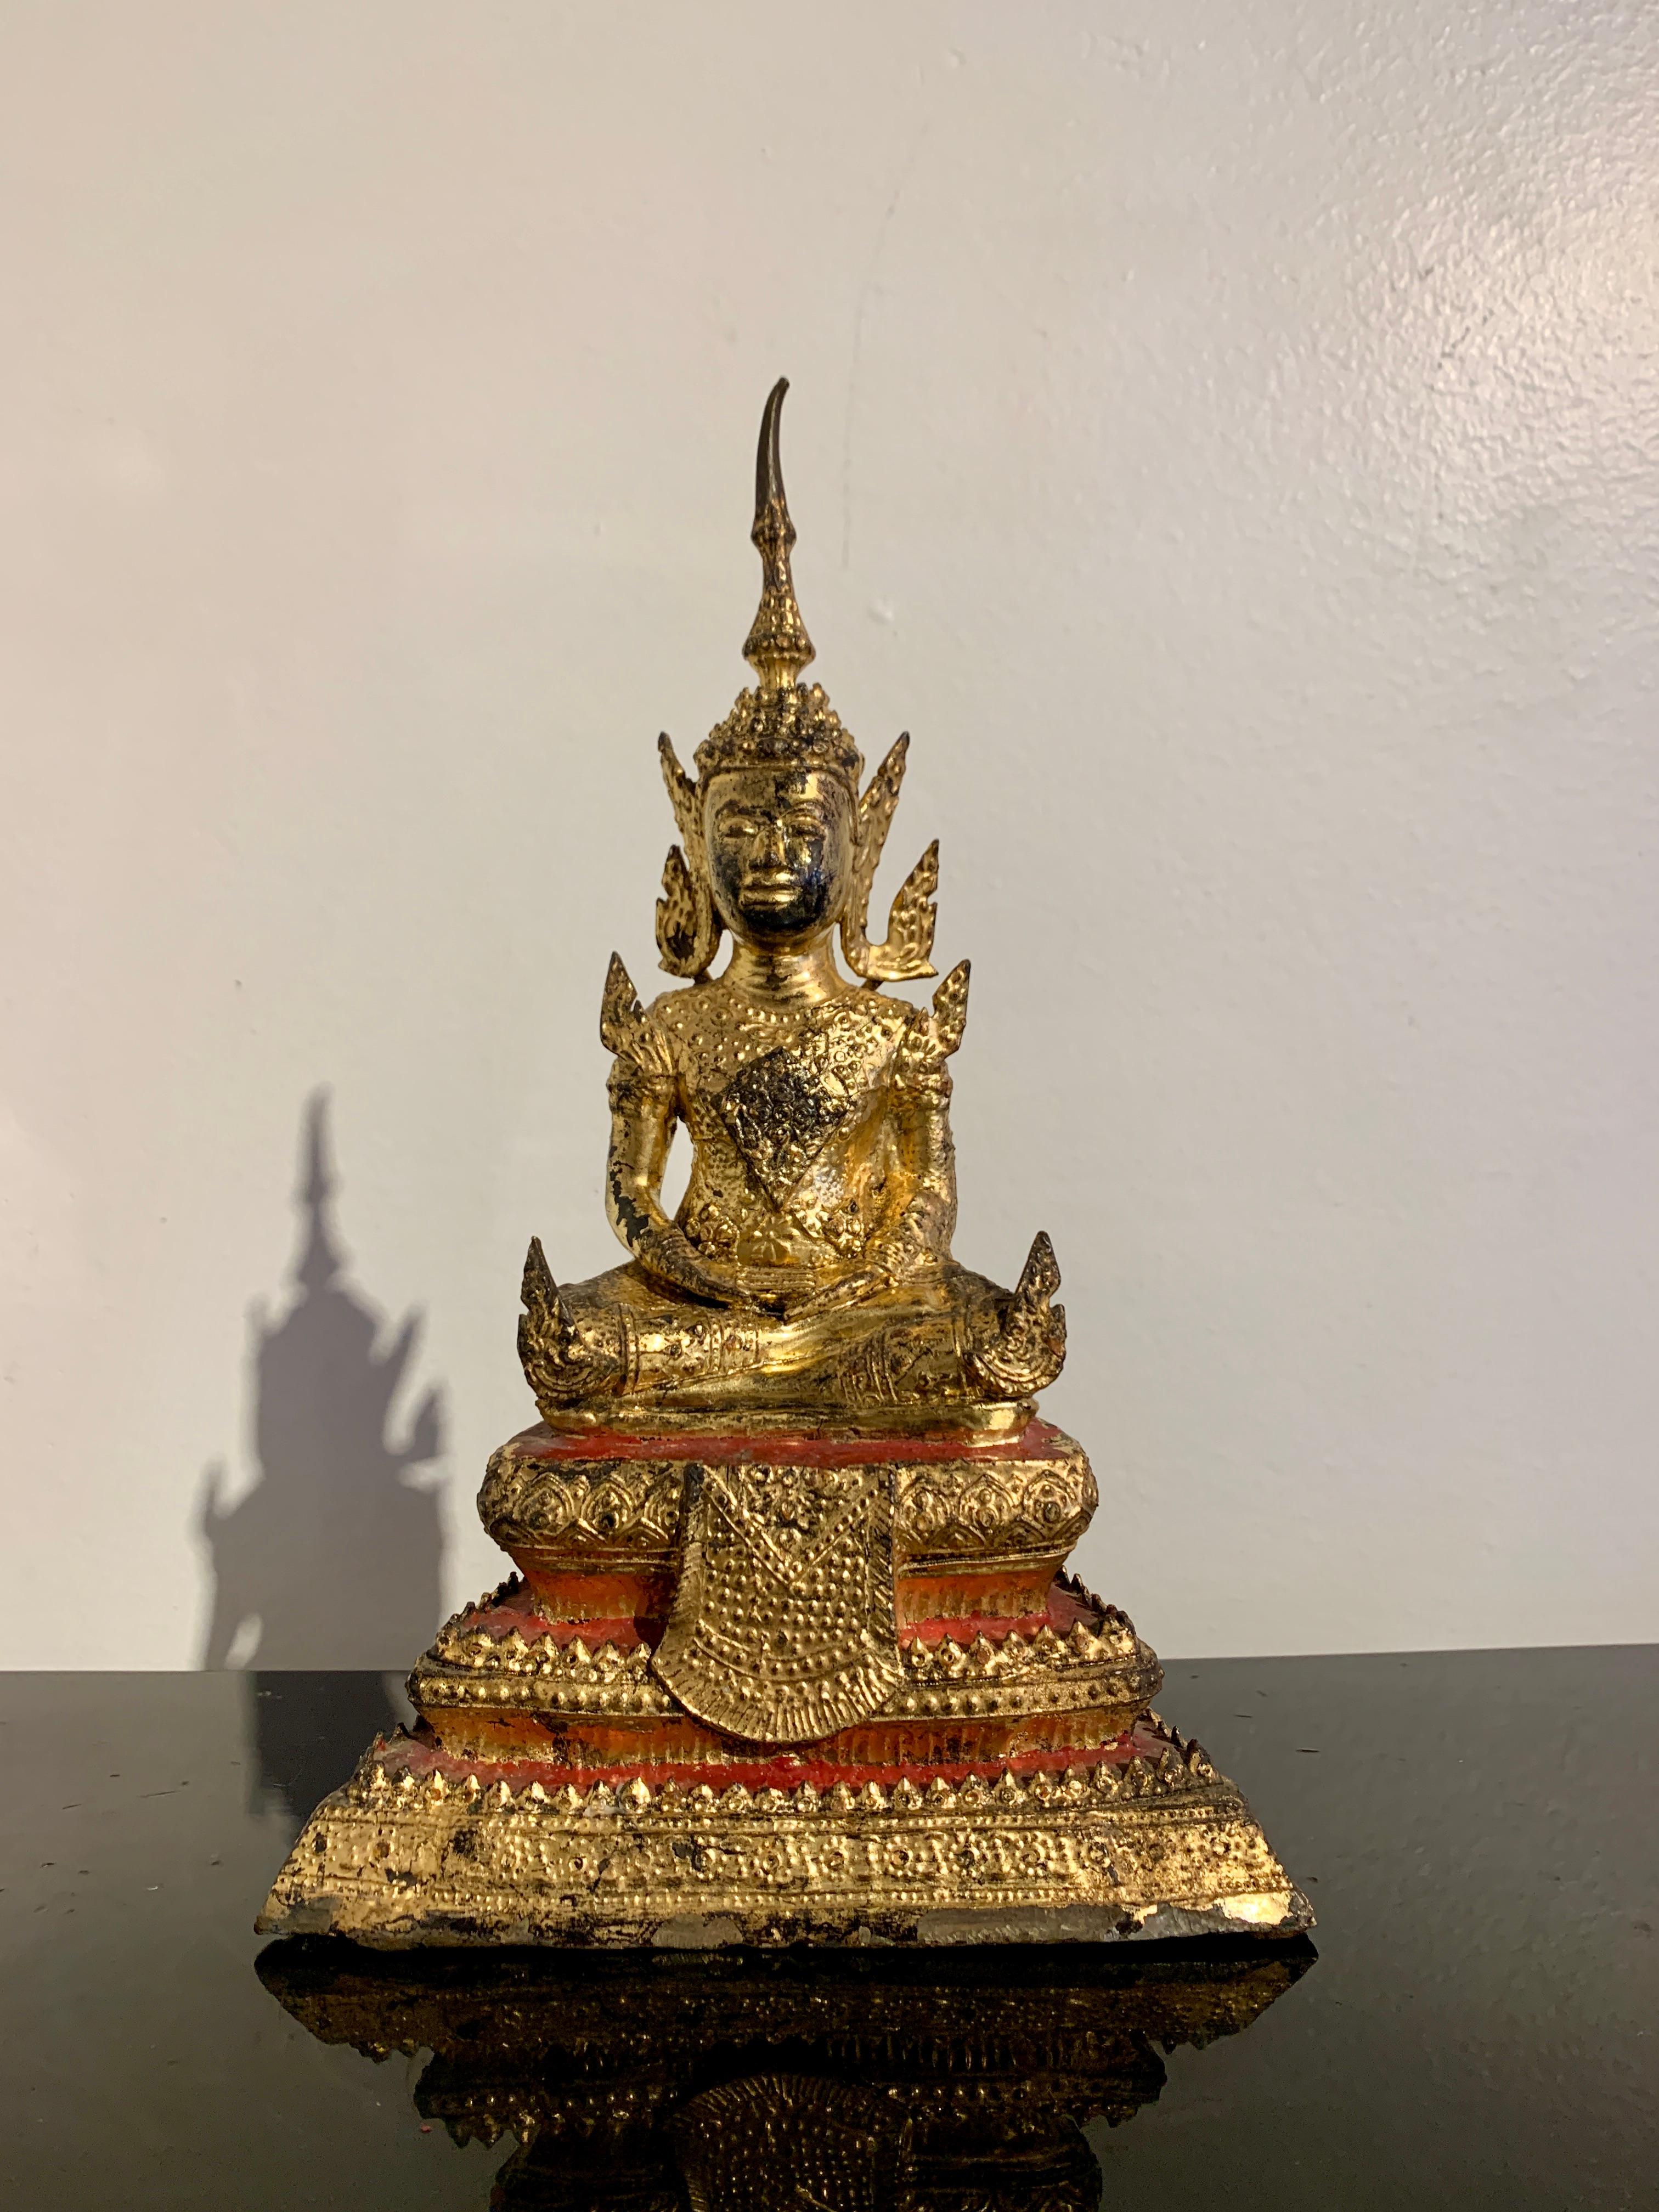 A delightful Thai Rattanakosin Period lacquered and gilt cast bronze figure of the Buddha in royal attire, mid 19th century, Thailand.

The charming figure depicts the Buddha in dhyanasana, the gesture of meditation. The Buddha sits serenely in